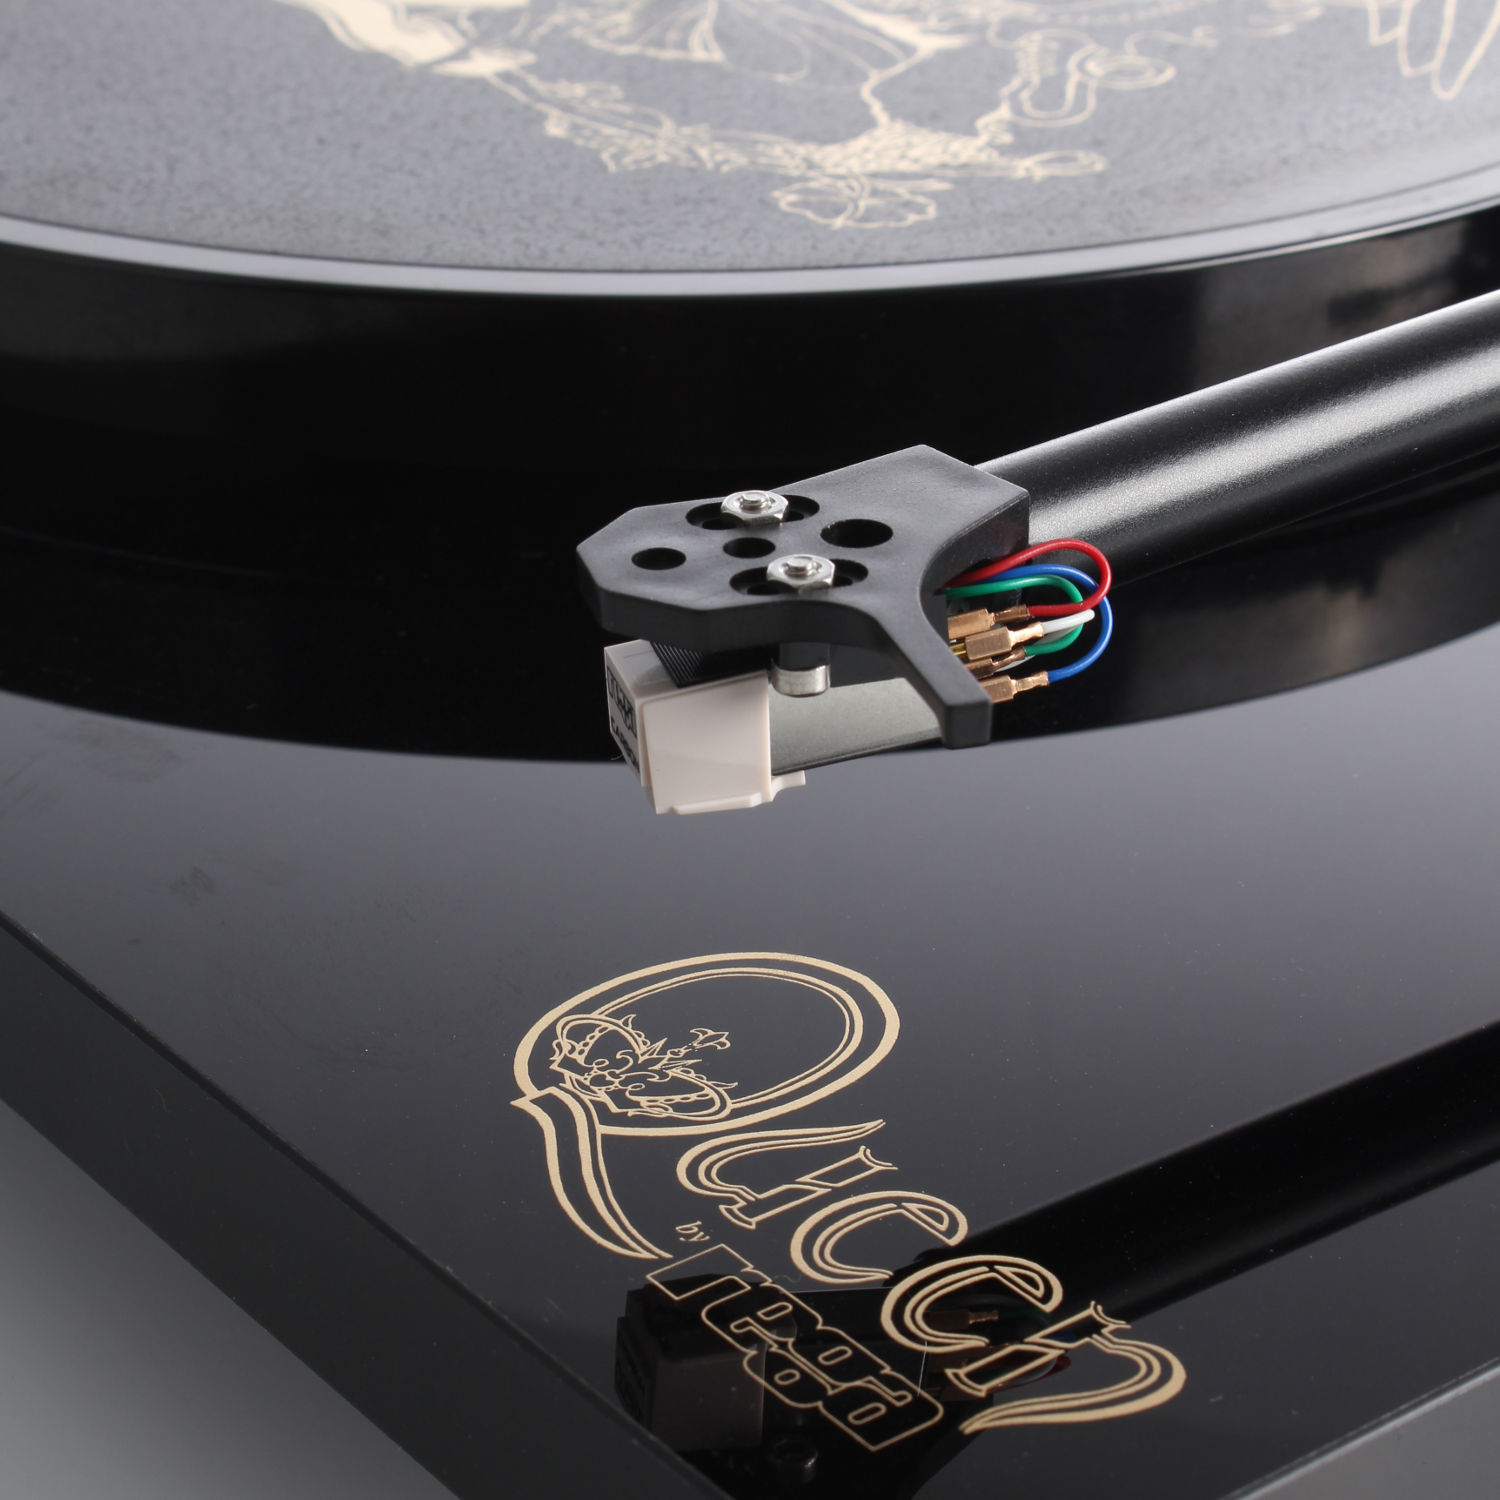 Simple and elegant, the Queen by Rega with the RB101 tonearm factory fitted with the Rega Carbon Cartridge